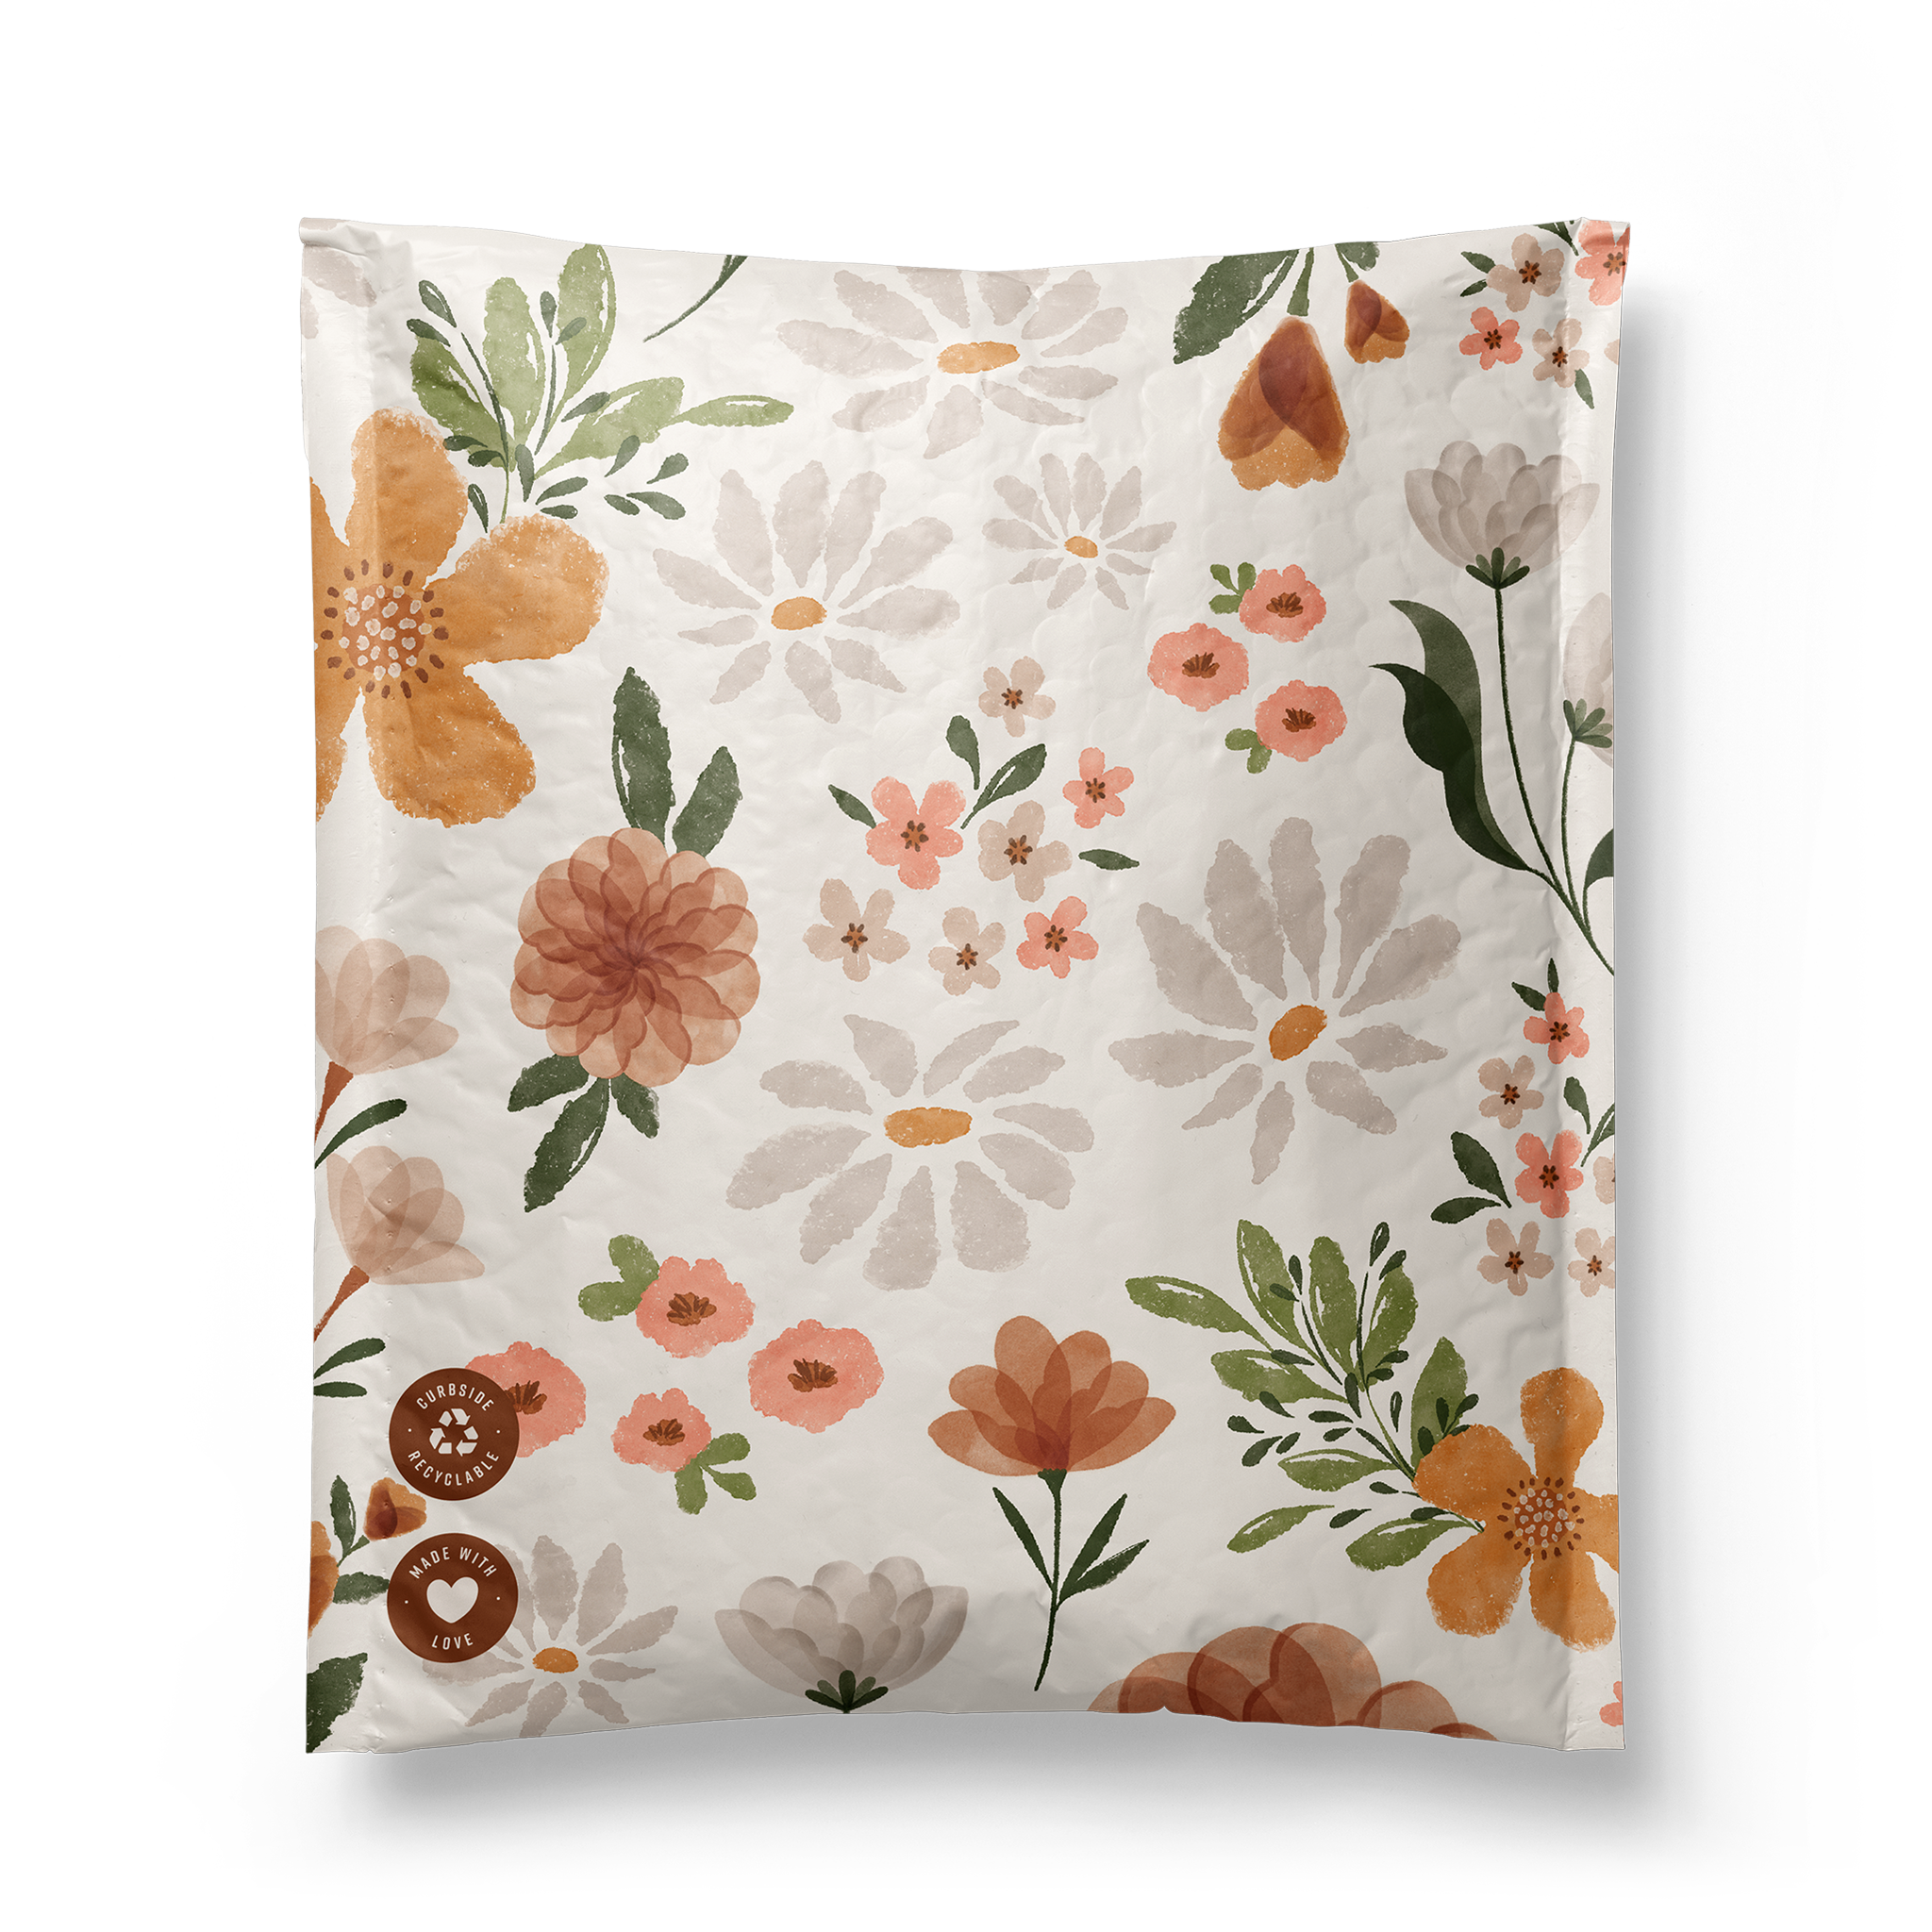 Floral pattern on a crinkled piece of impack.co with honeycomb padding.